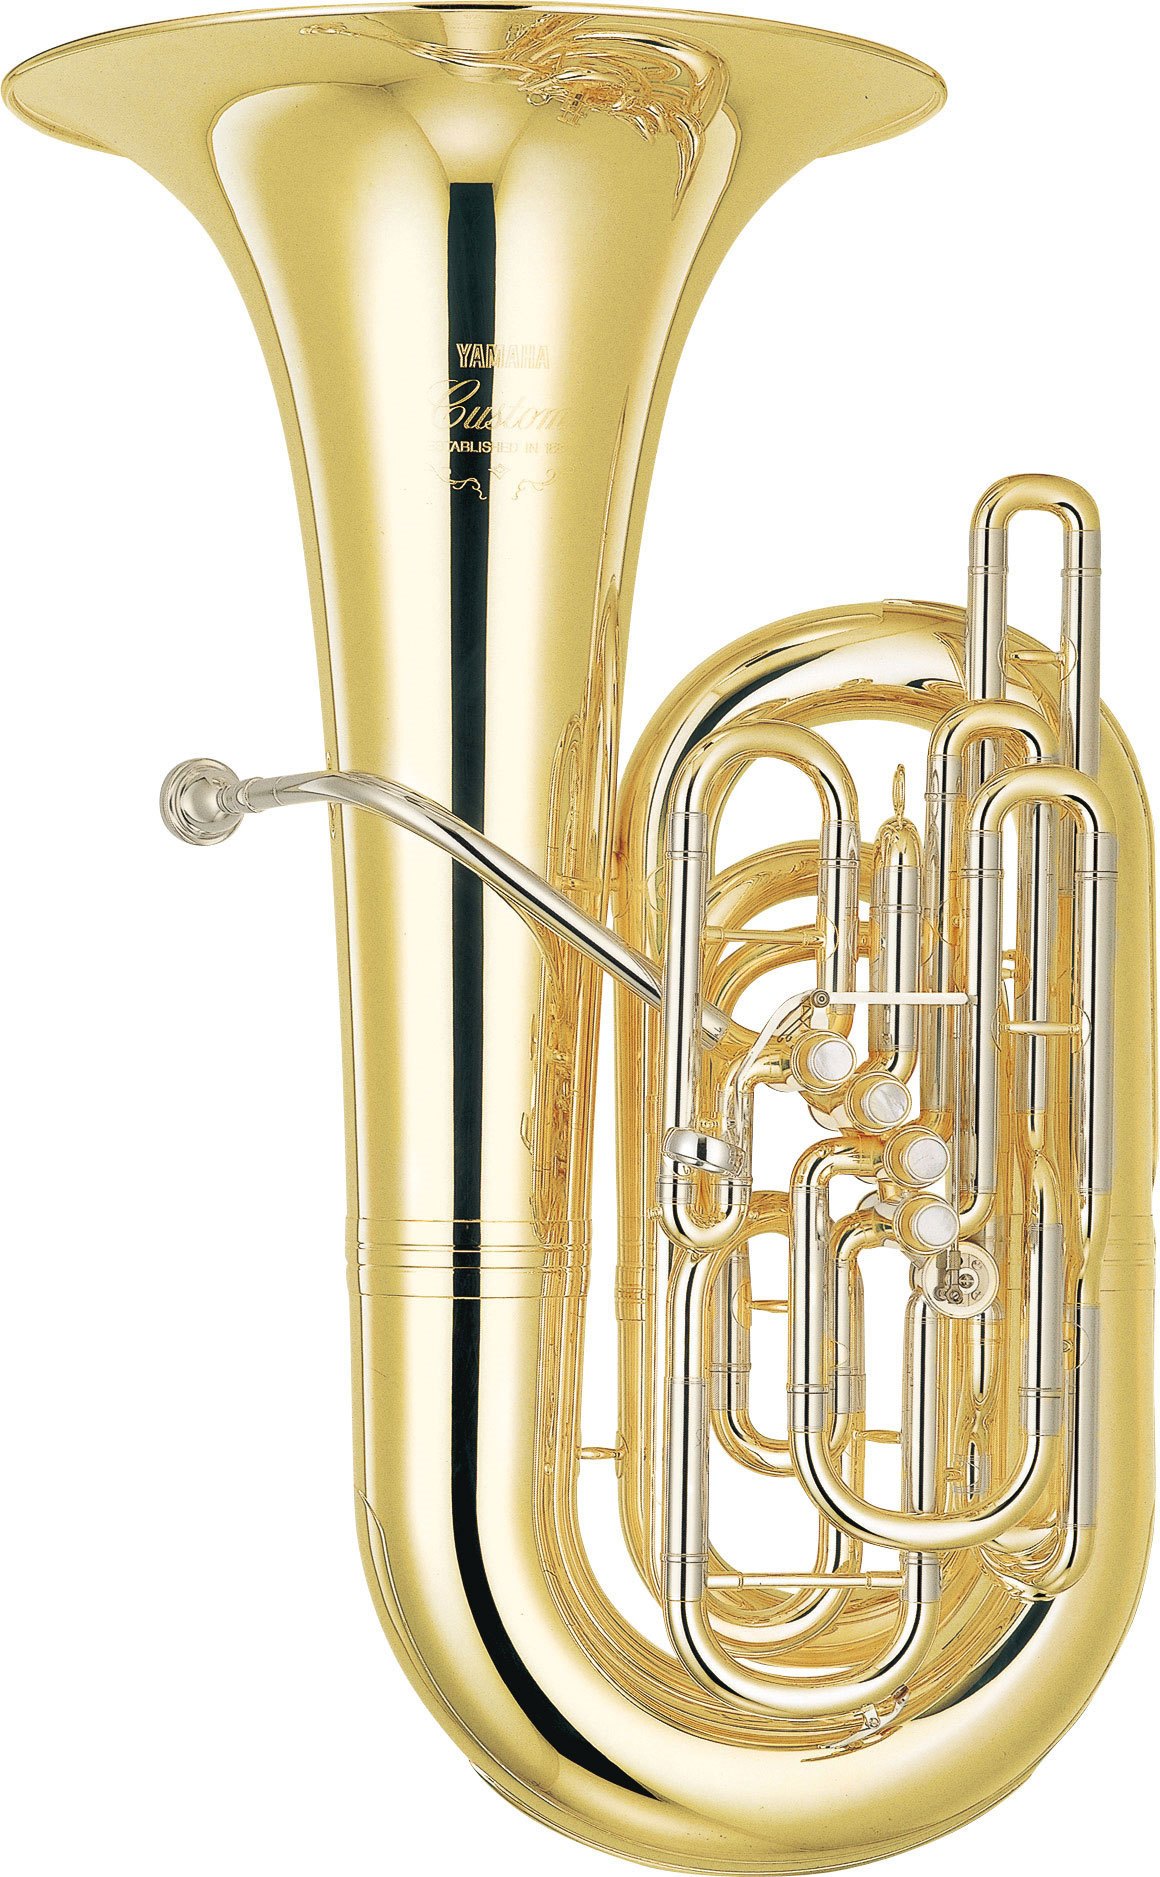 YCB-822S - Overview - Tubas - Brass & Woodwinds - Musical 